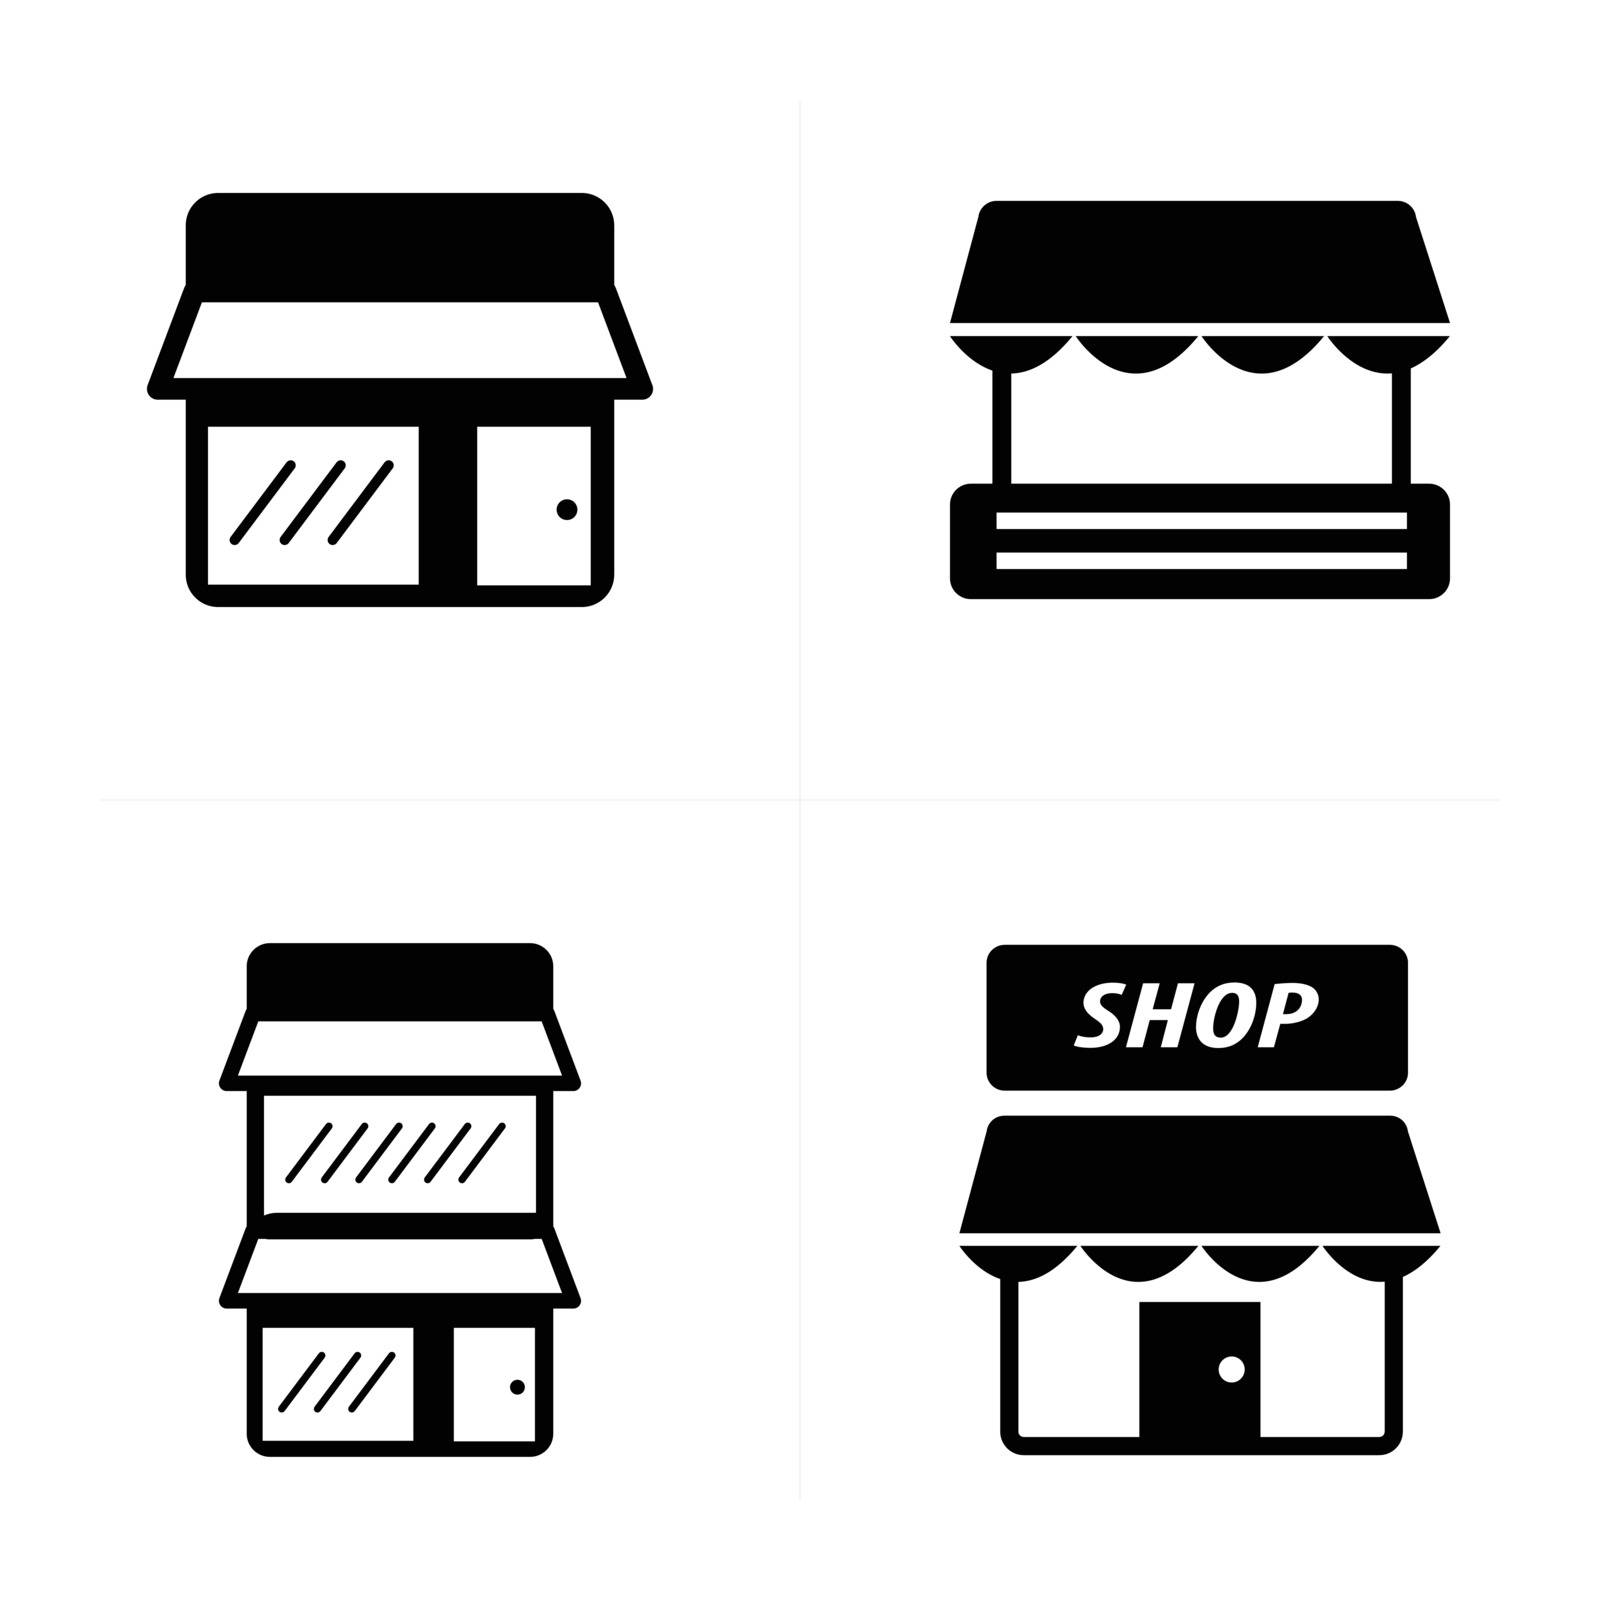 Store icons set by iconmama